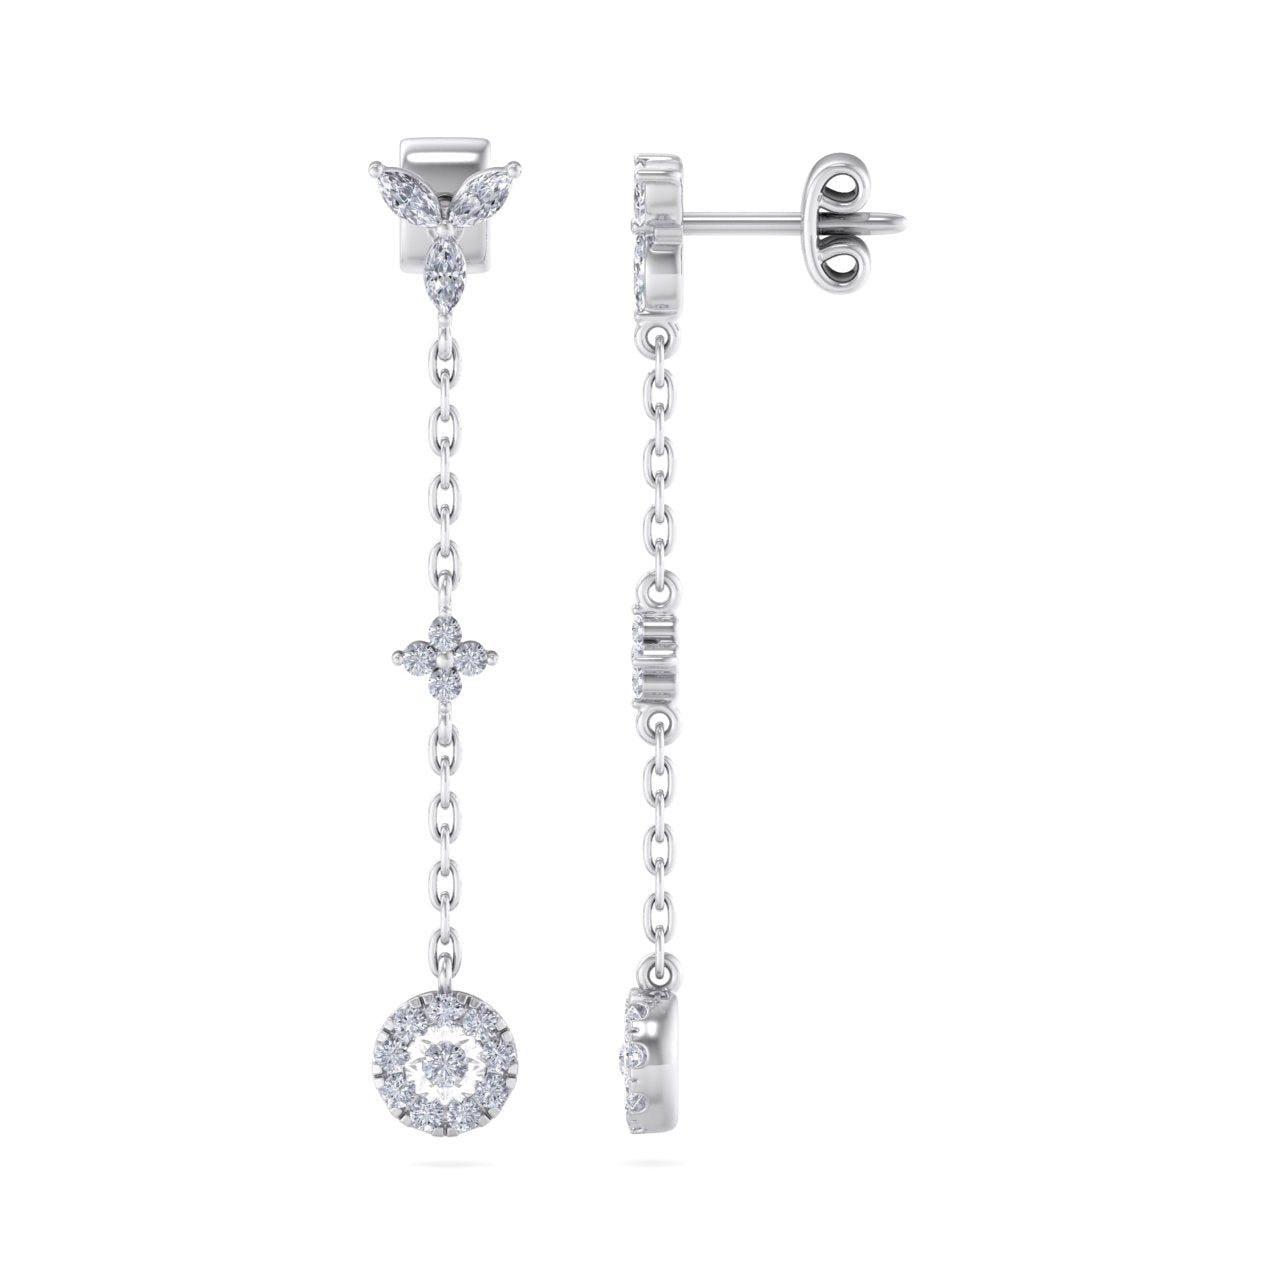 Drop earrings with miracle plate in white gold with white diamonds of 0.47 ct in weight